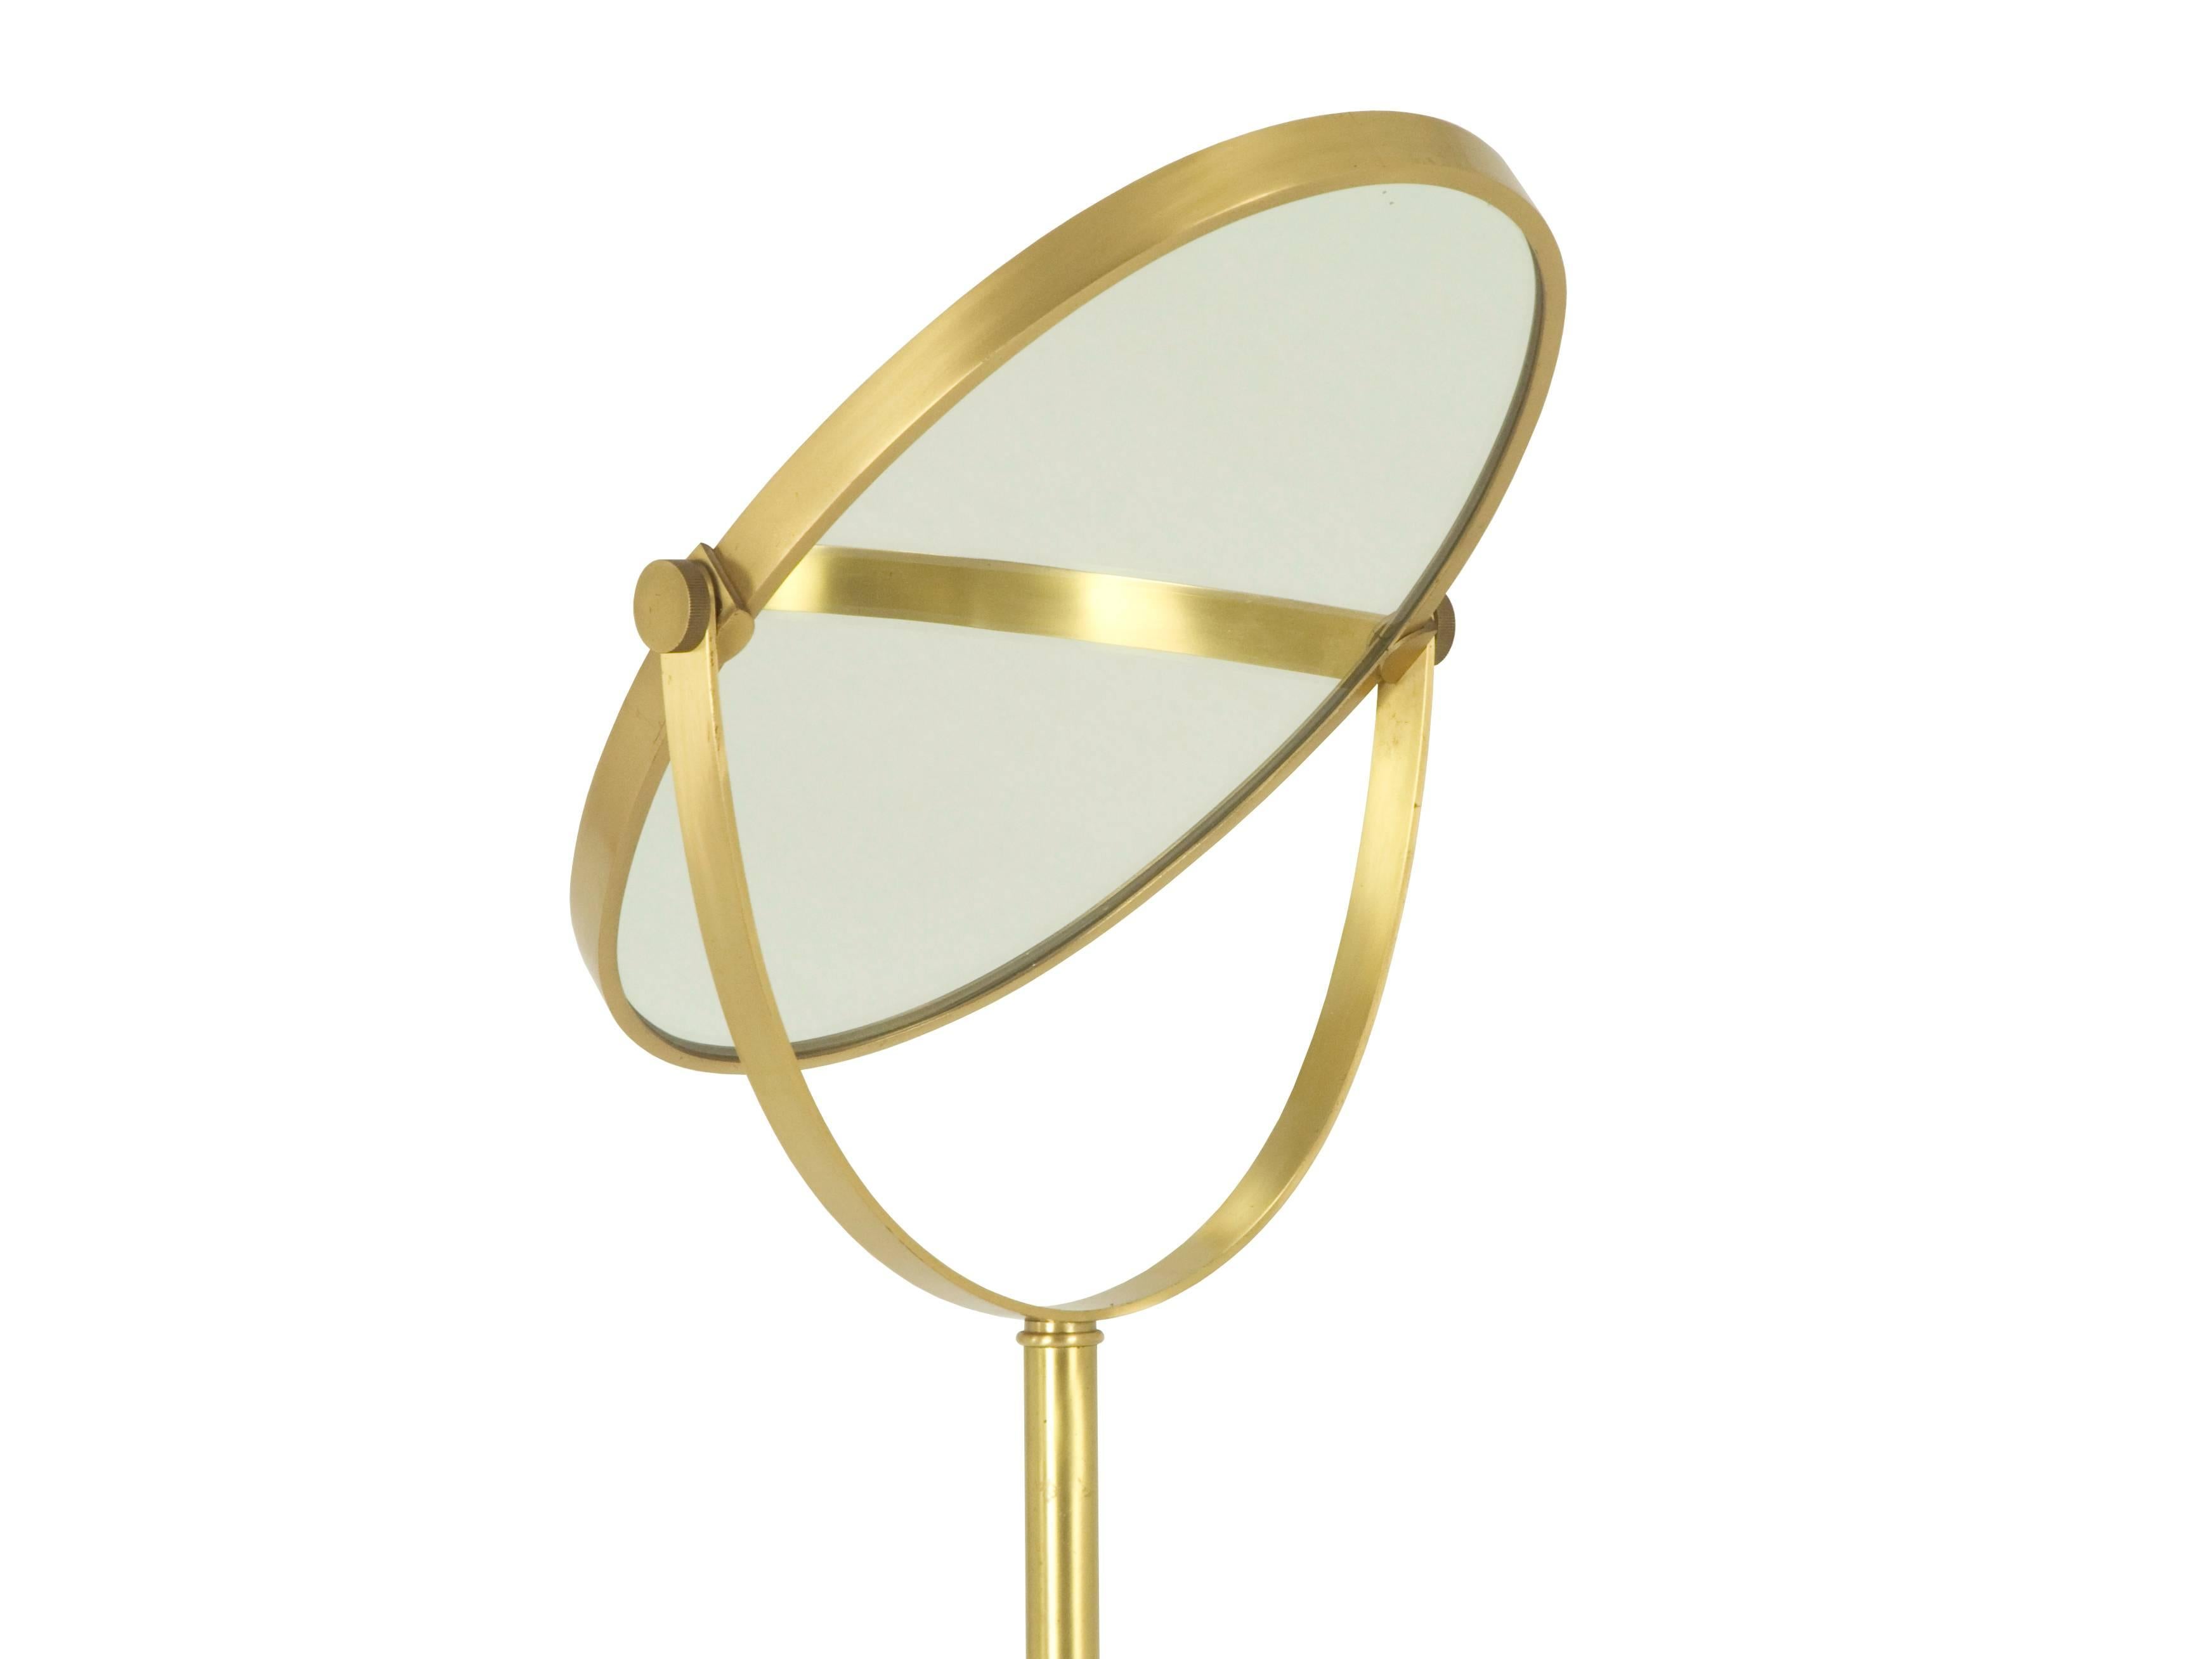 This freestanding floor mirror was designed and produced in Italy between the 1960s and the 1970s. It is made from frosted brass and mirrored glass and it remains in pretty good vintage condition. The mirror is tilting and can be placed in several